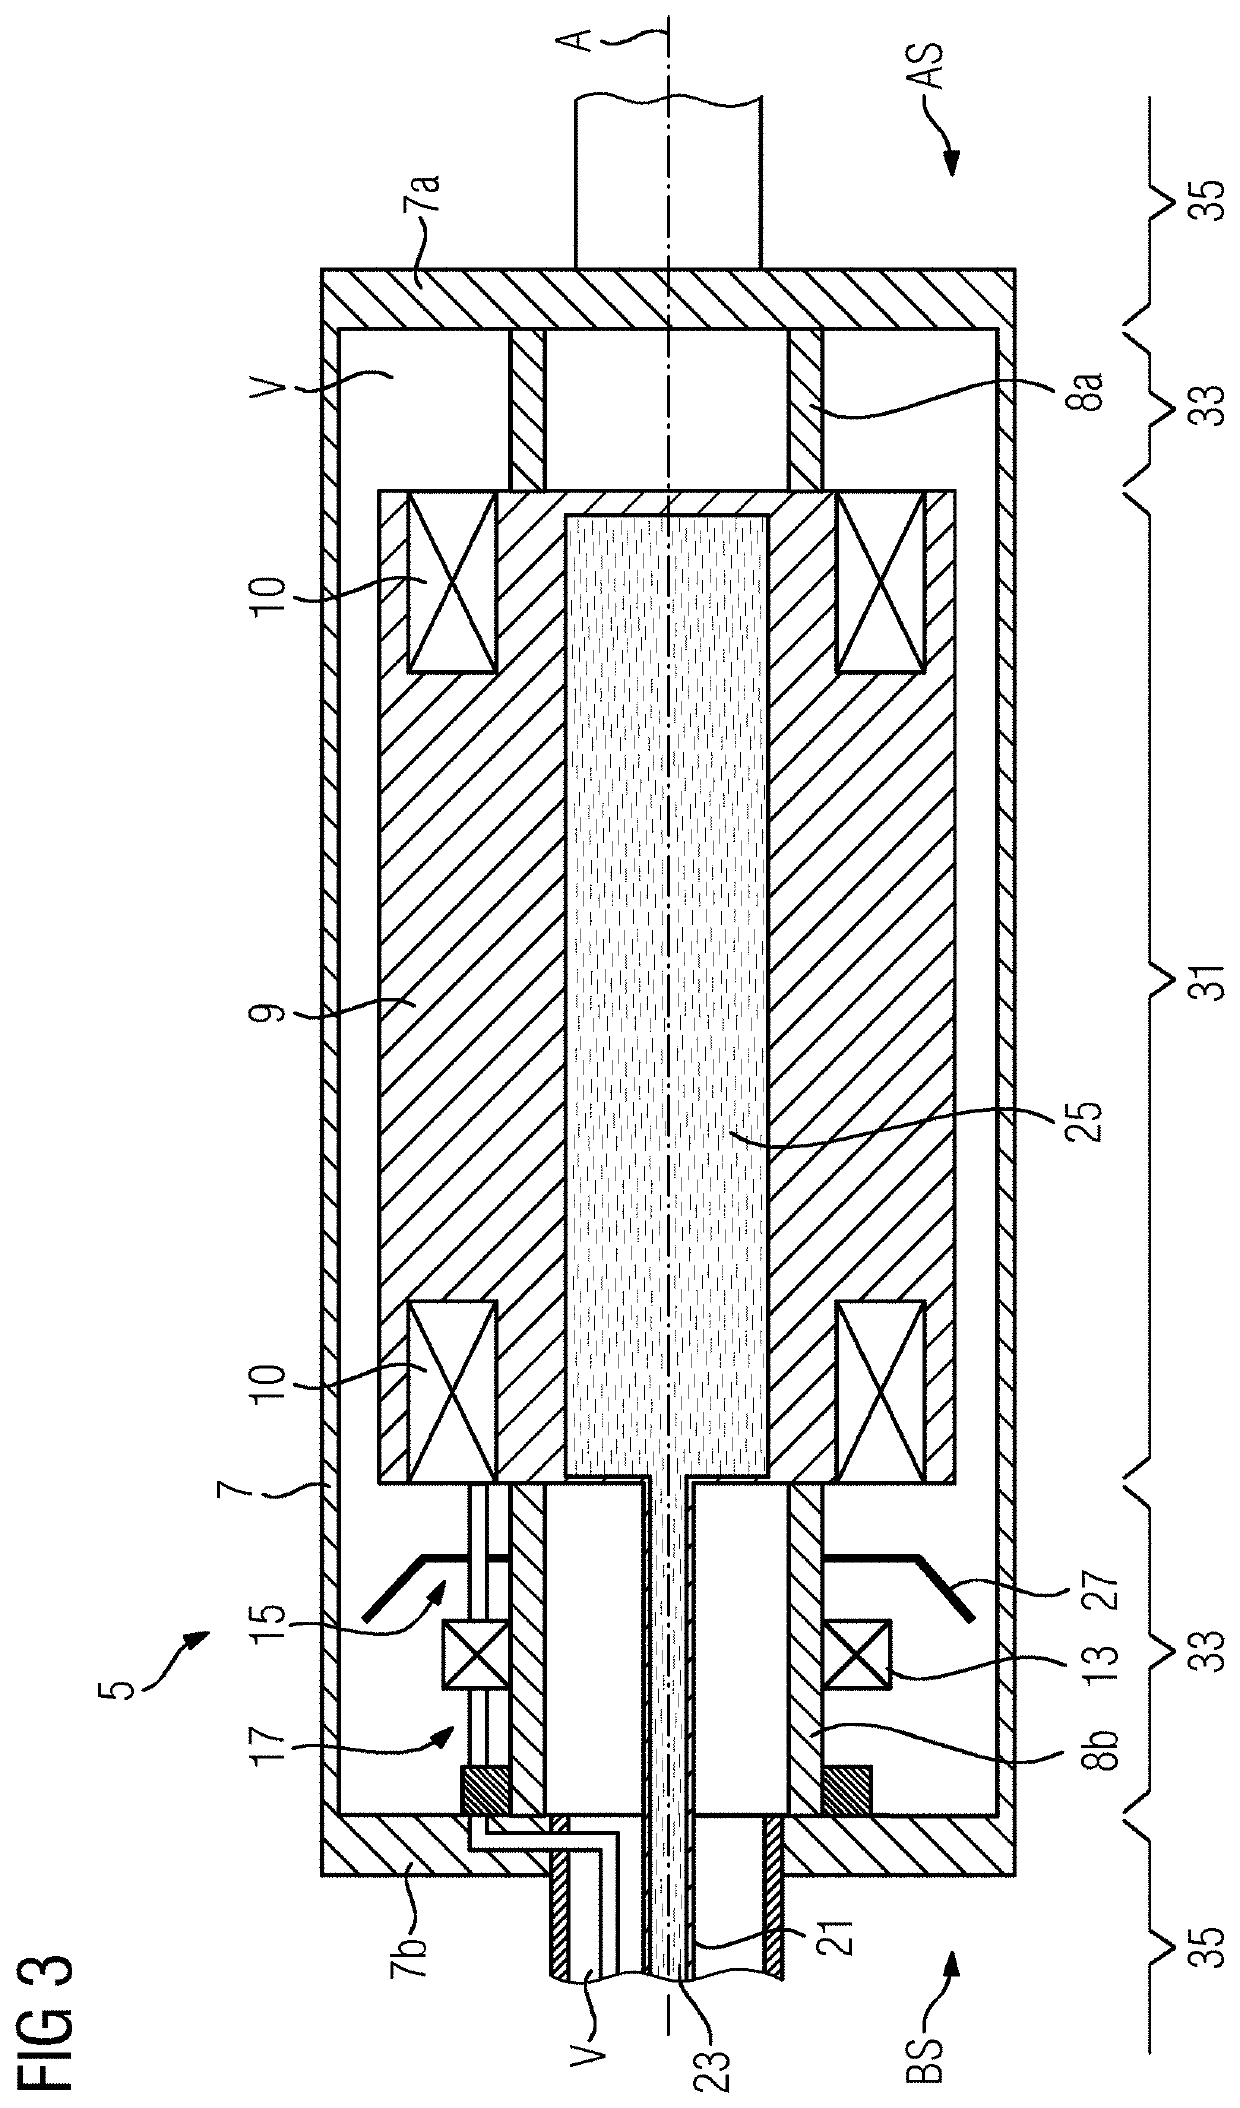 Rotor with superconducting winding for continuous current mode operation